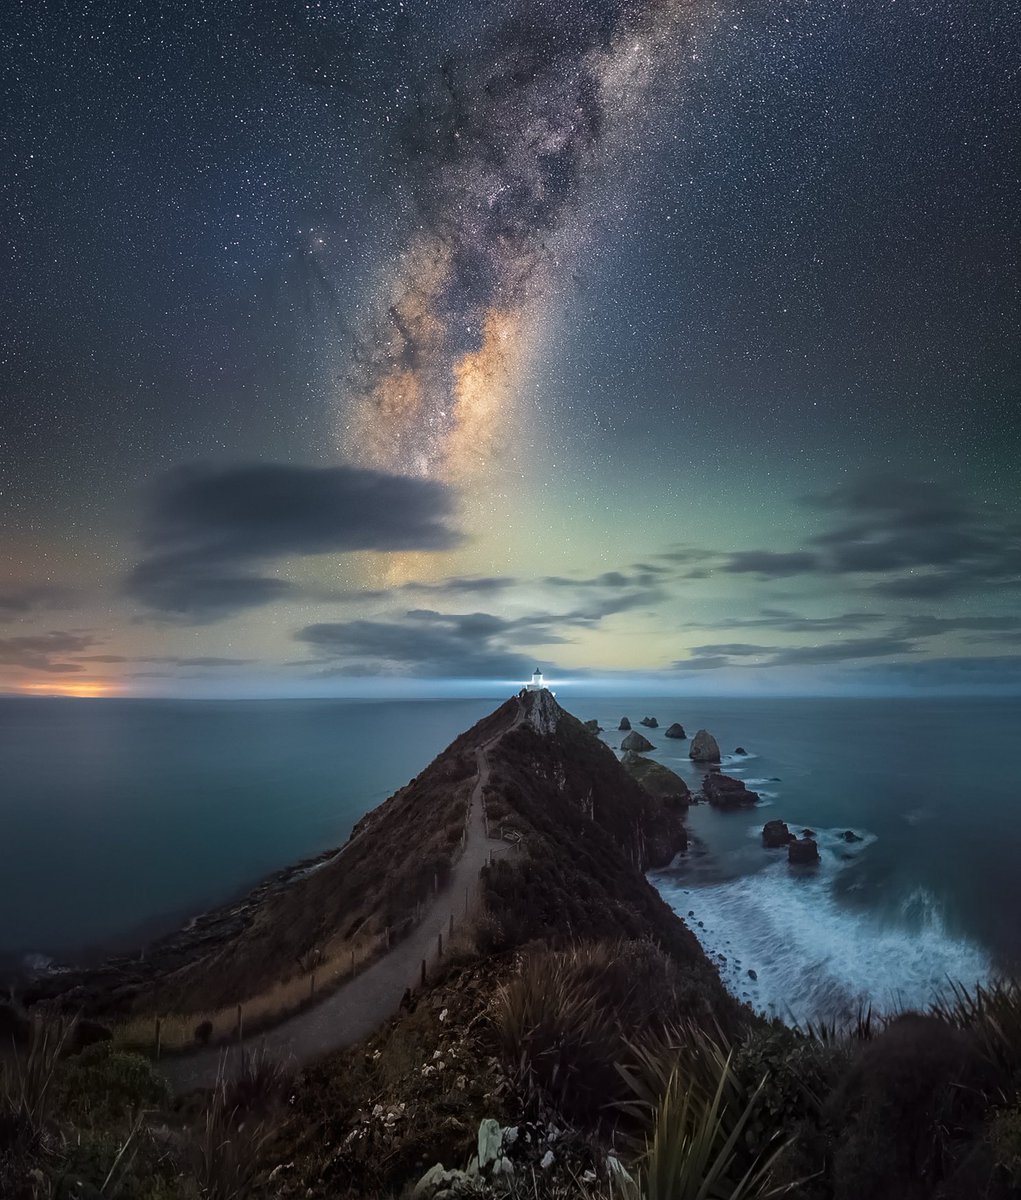 Nugget Point, New Zealand 🇳🇿. #CANZUK #WorldAstronomyDay 🔭✨
📷 South of Home Photography